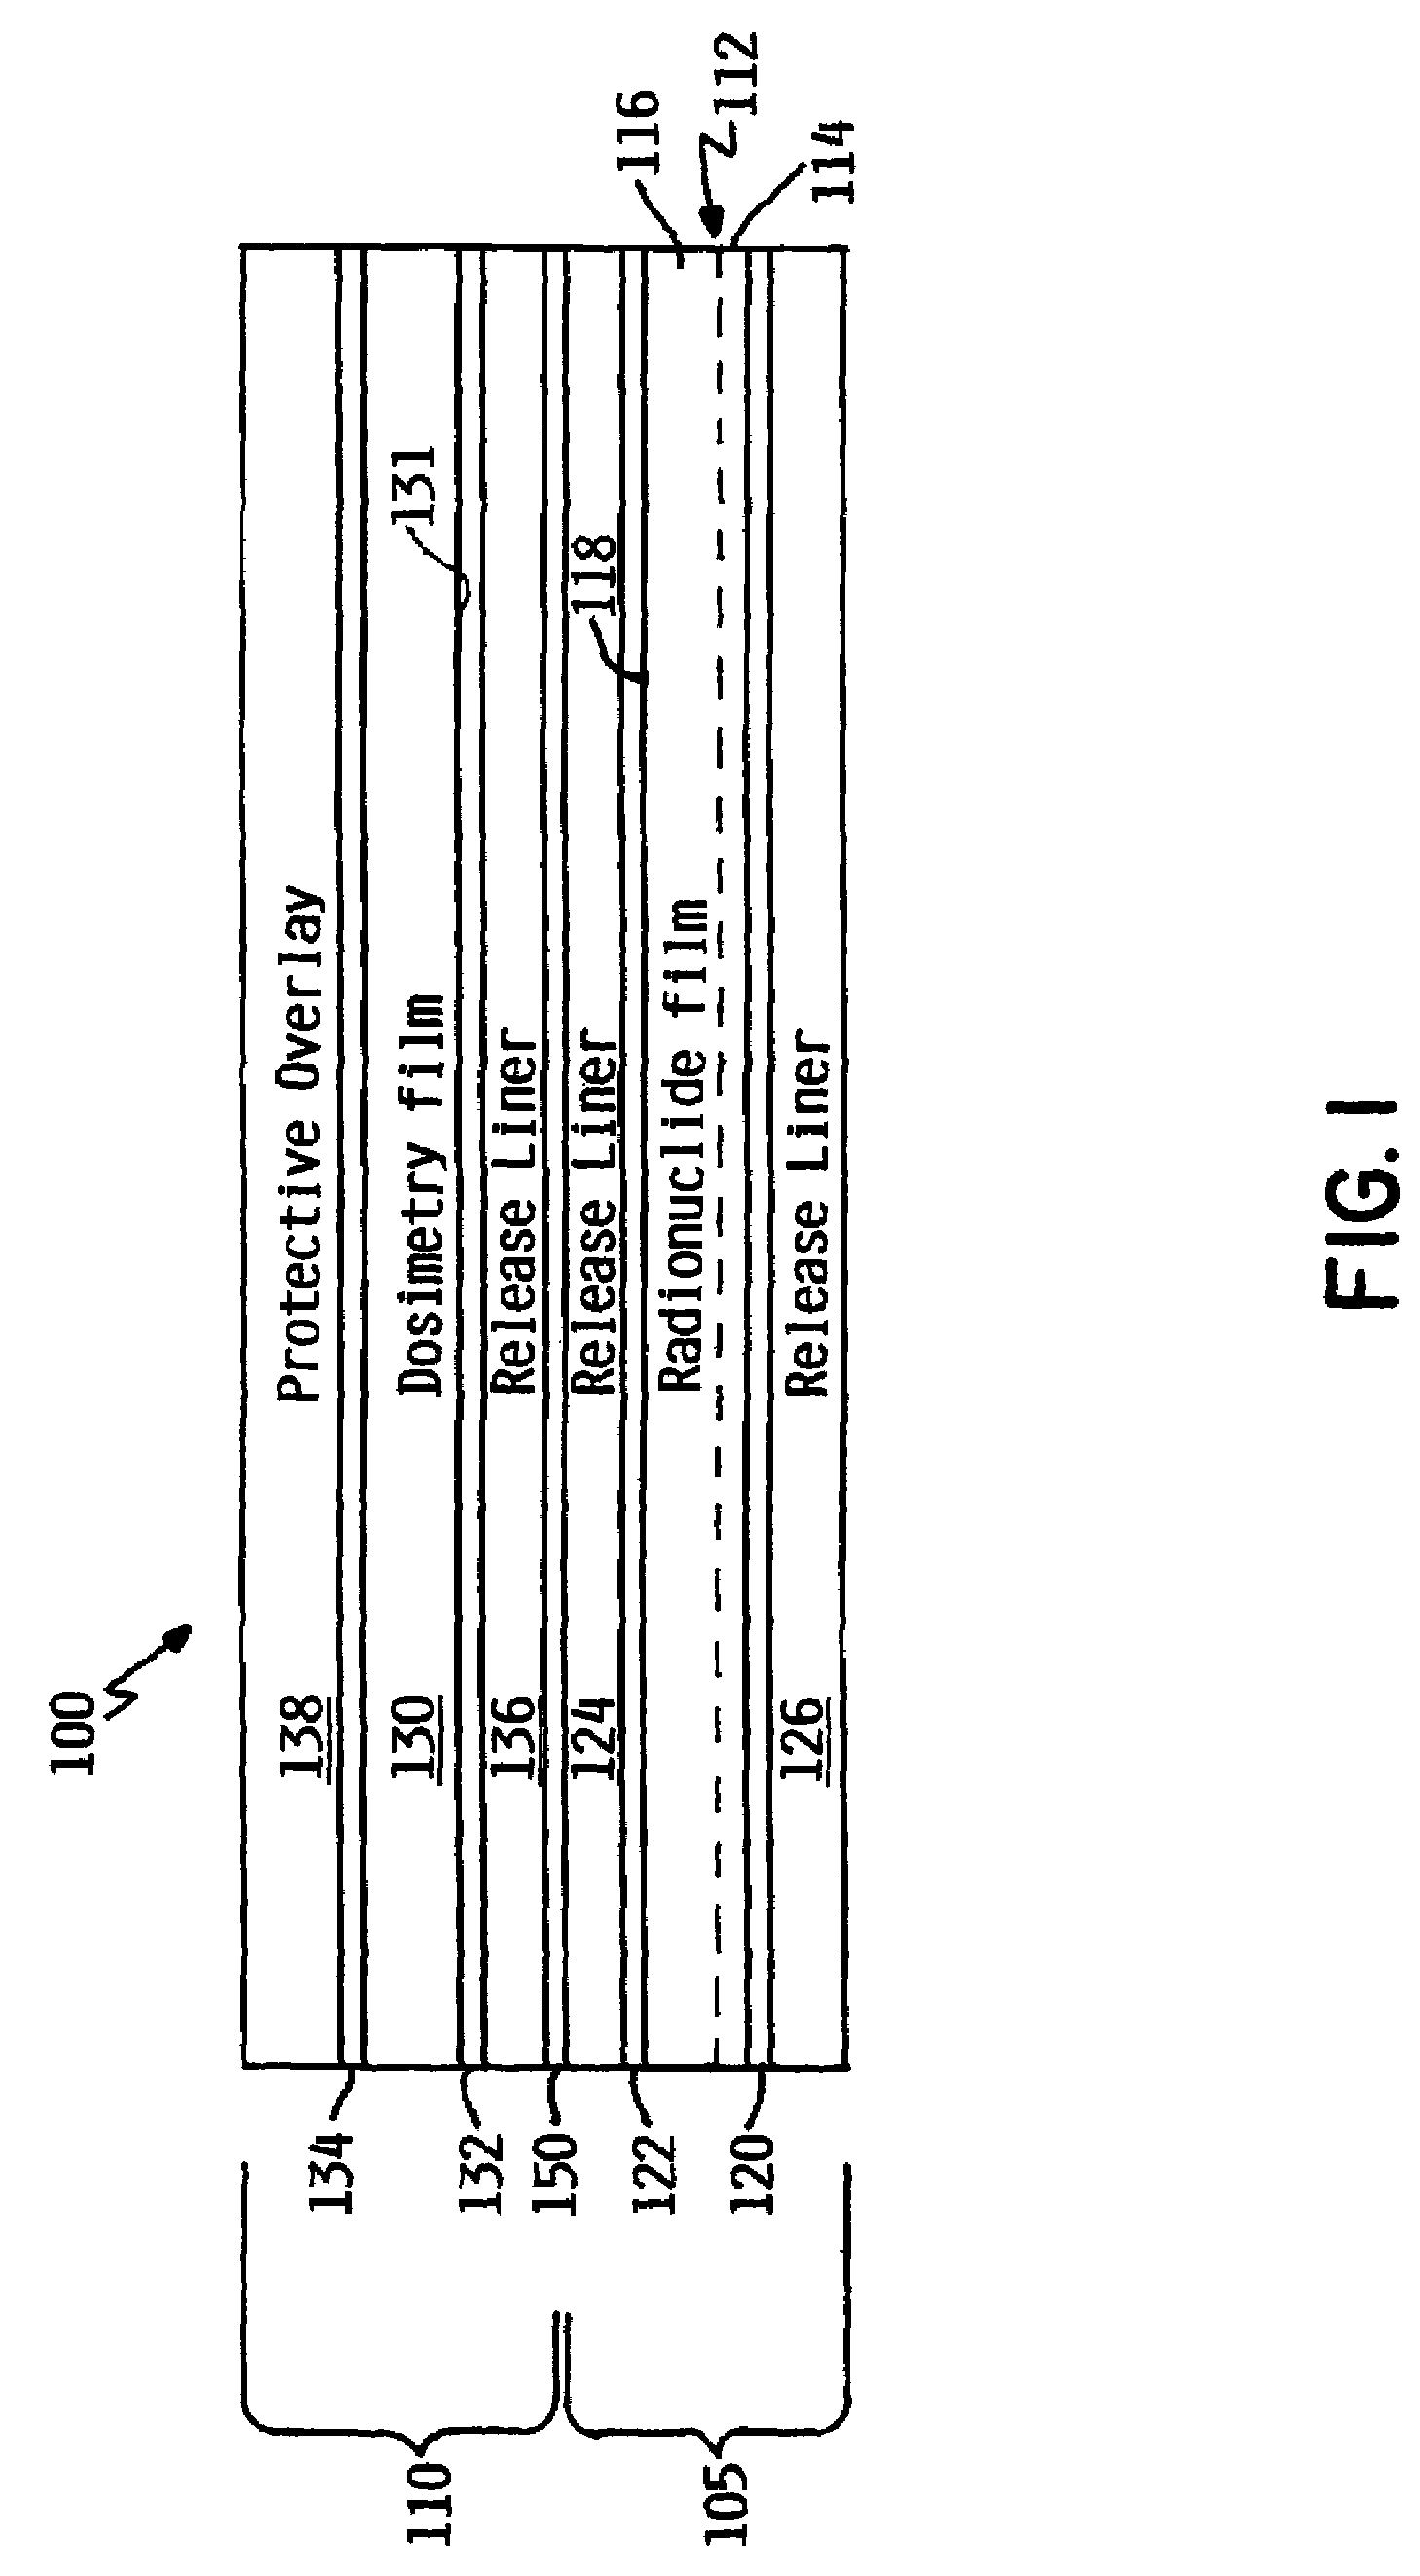 Methods and apparatus capable of indicating elapsed time intervals